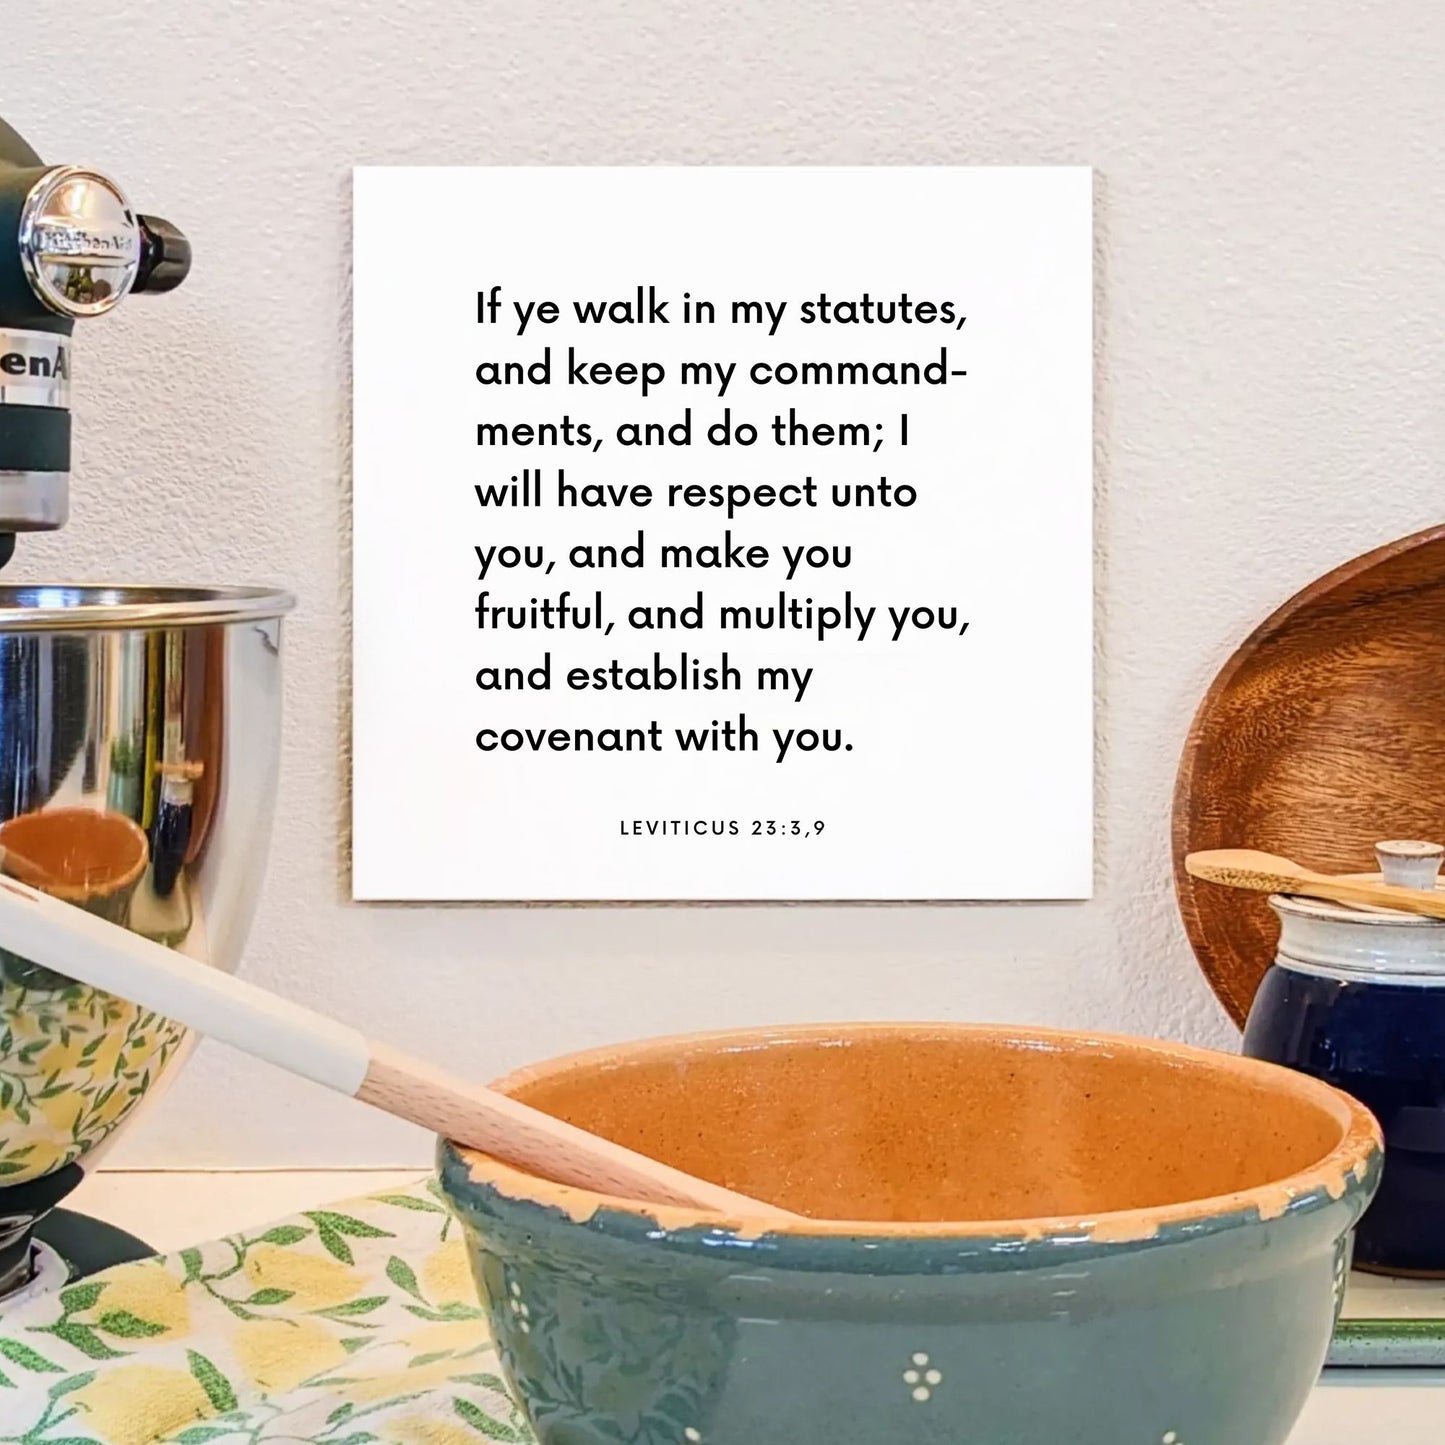 Kitchen mouting of the scripture tile for Leviticus 23:3,9 - "I will have respect unto you, and make you fruitful"